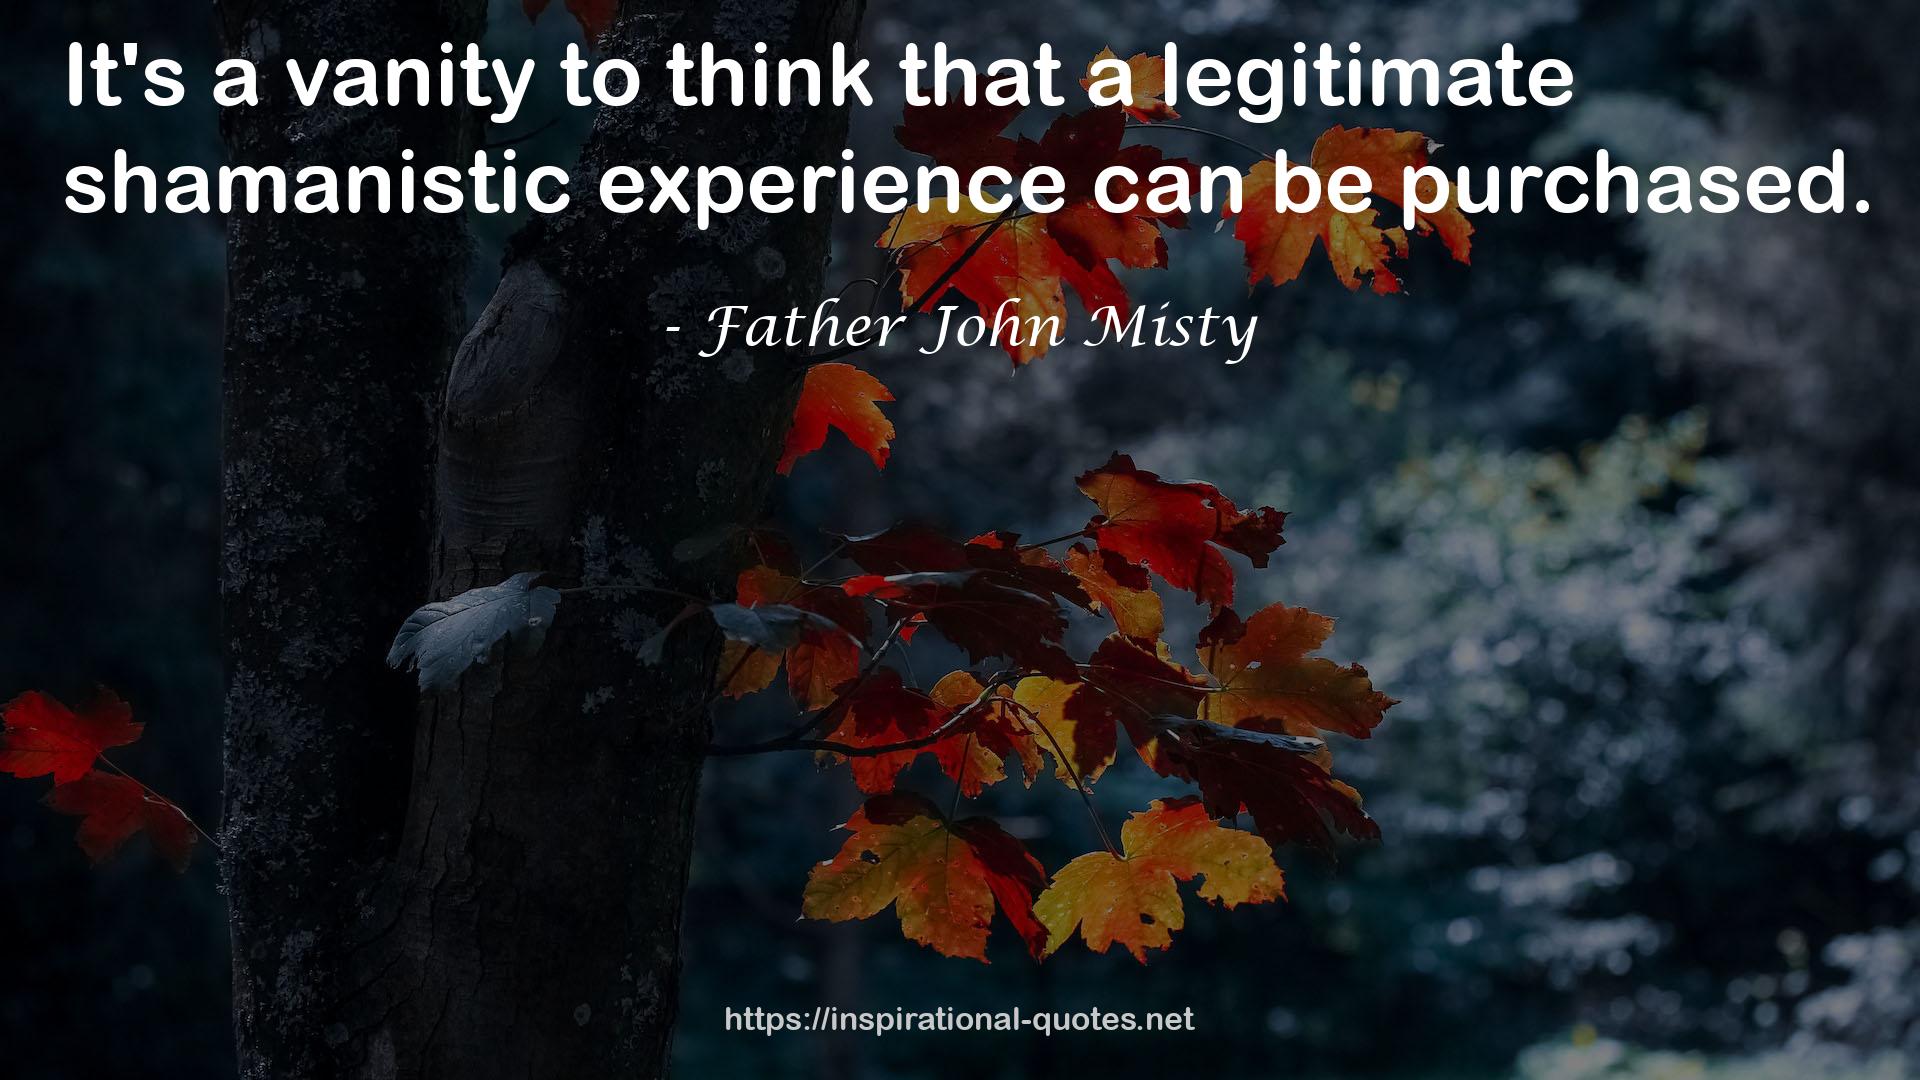 Father John Misty QUOTES